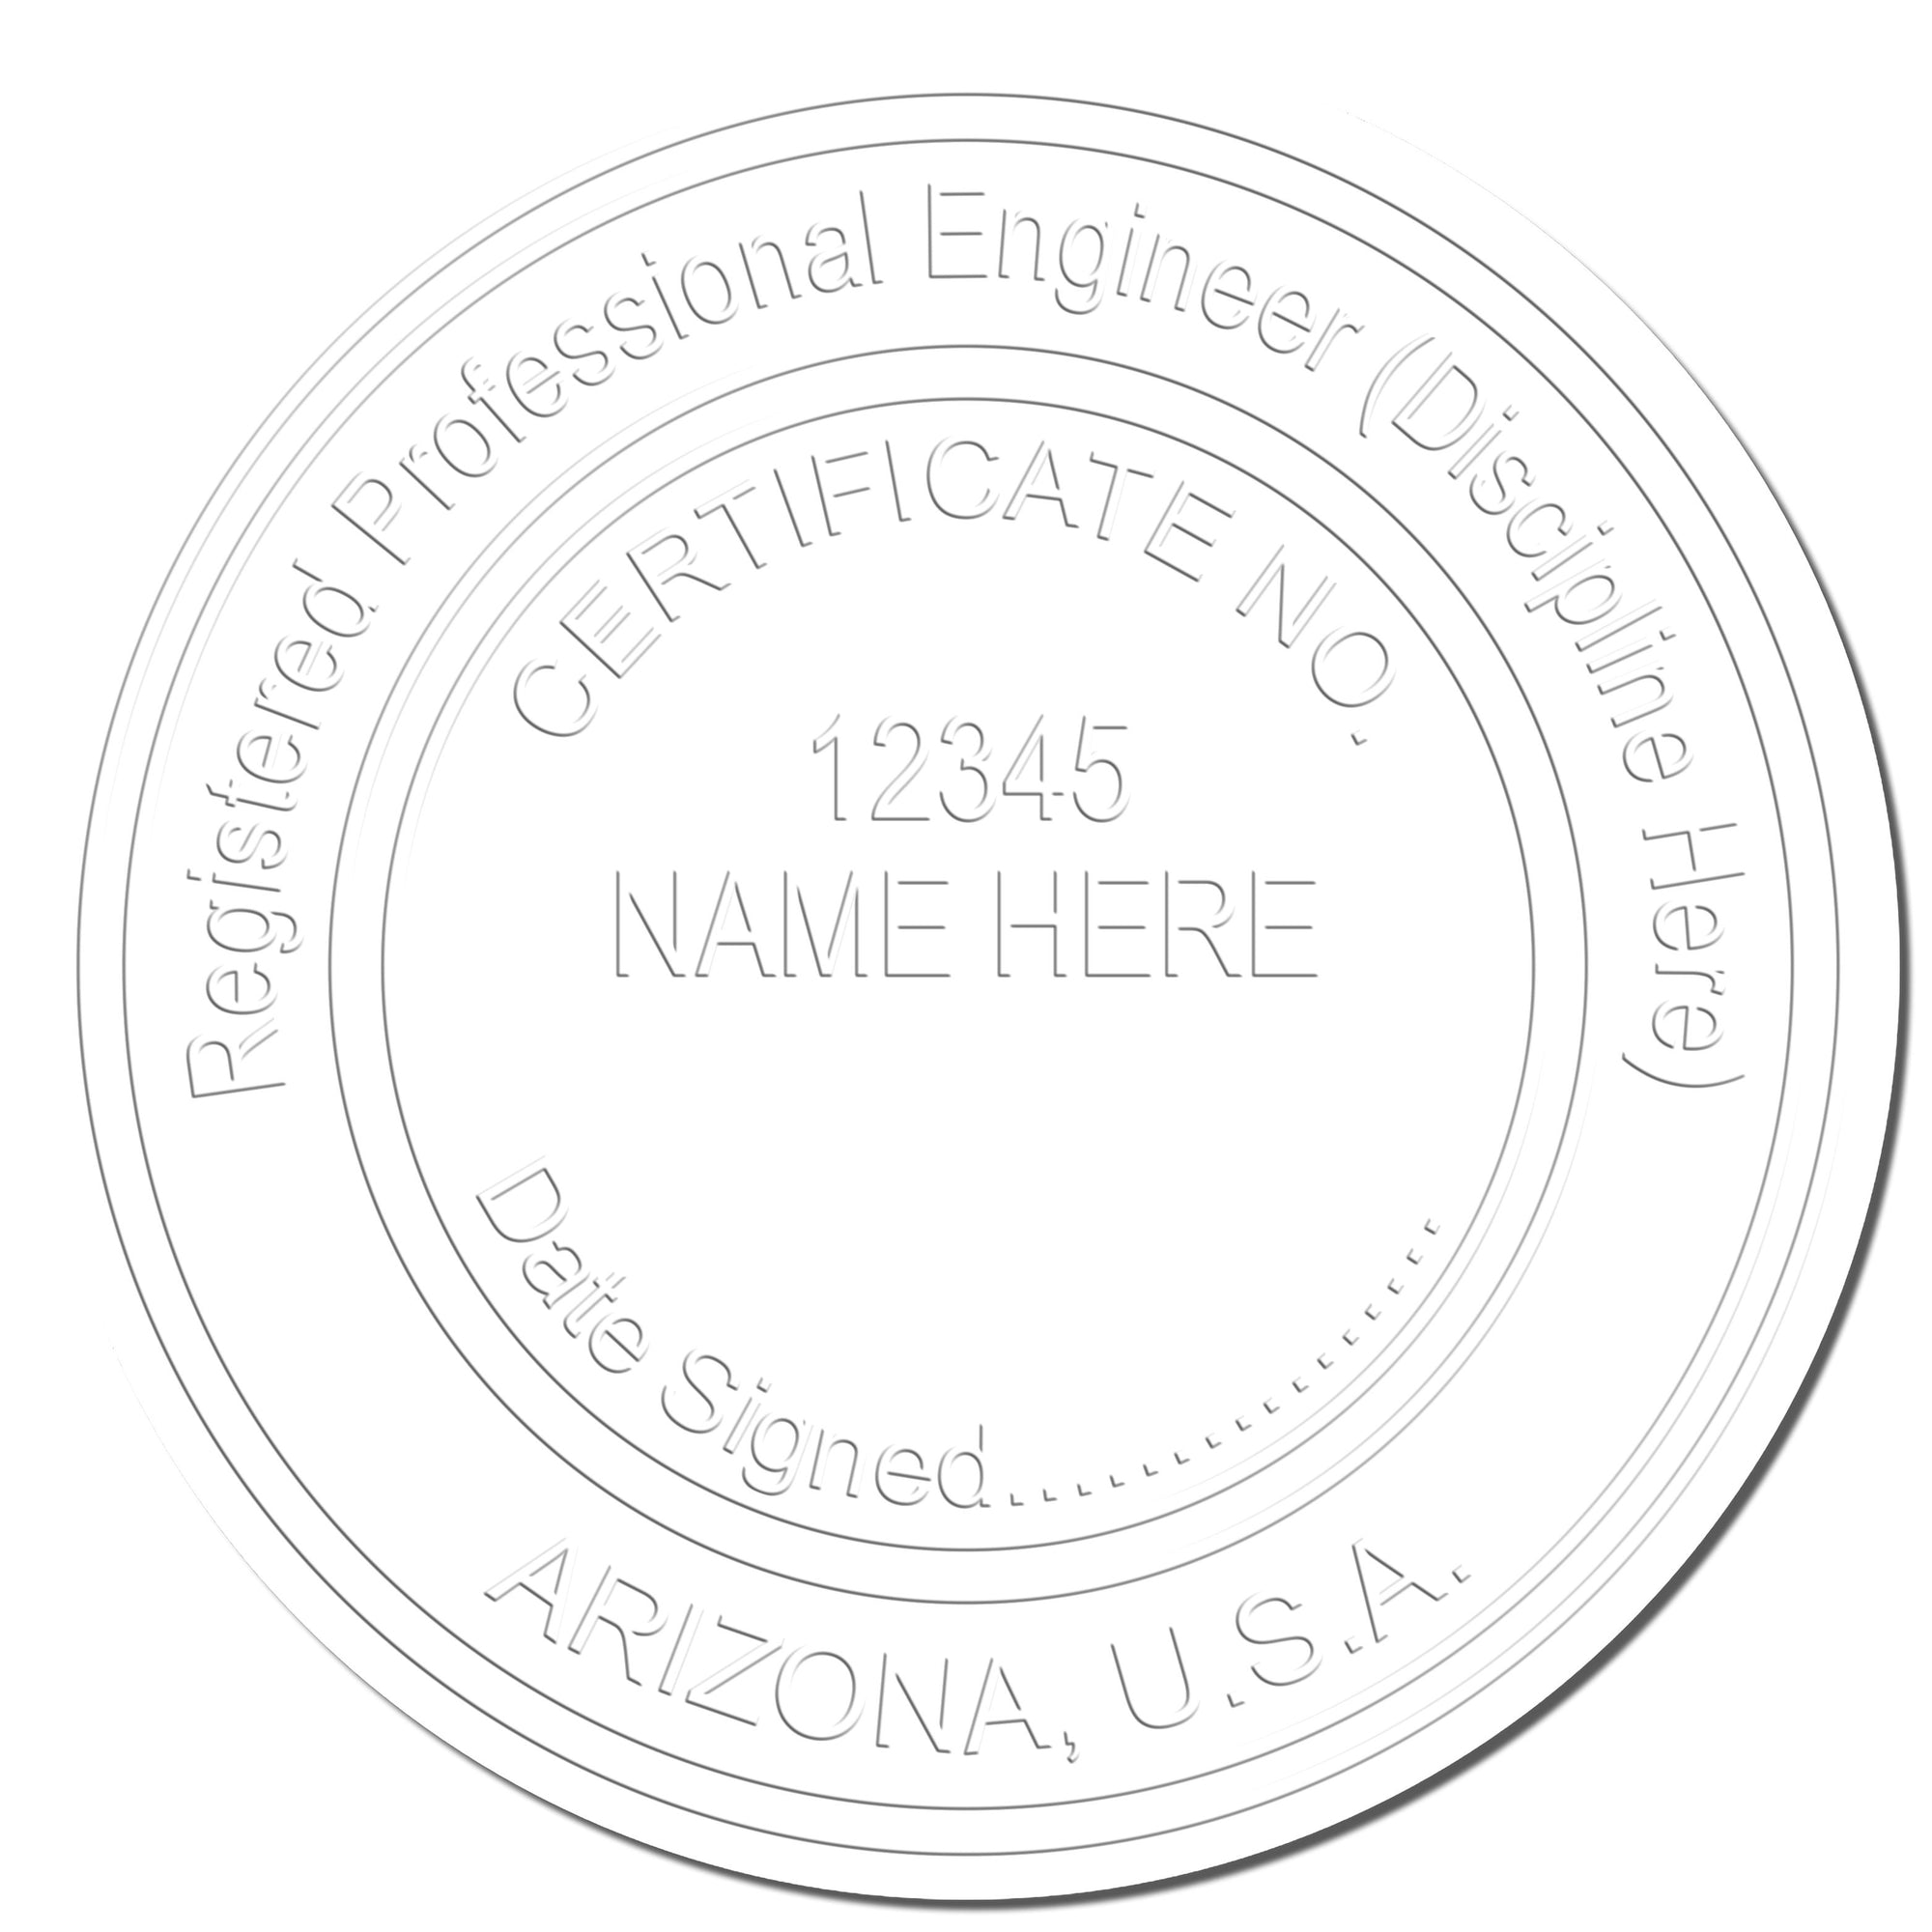 The main image for the Arizona Engineer Desk Seal depicting a sample of the imprint and electronic files